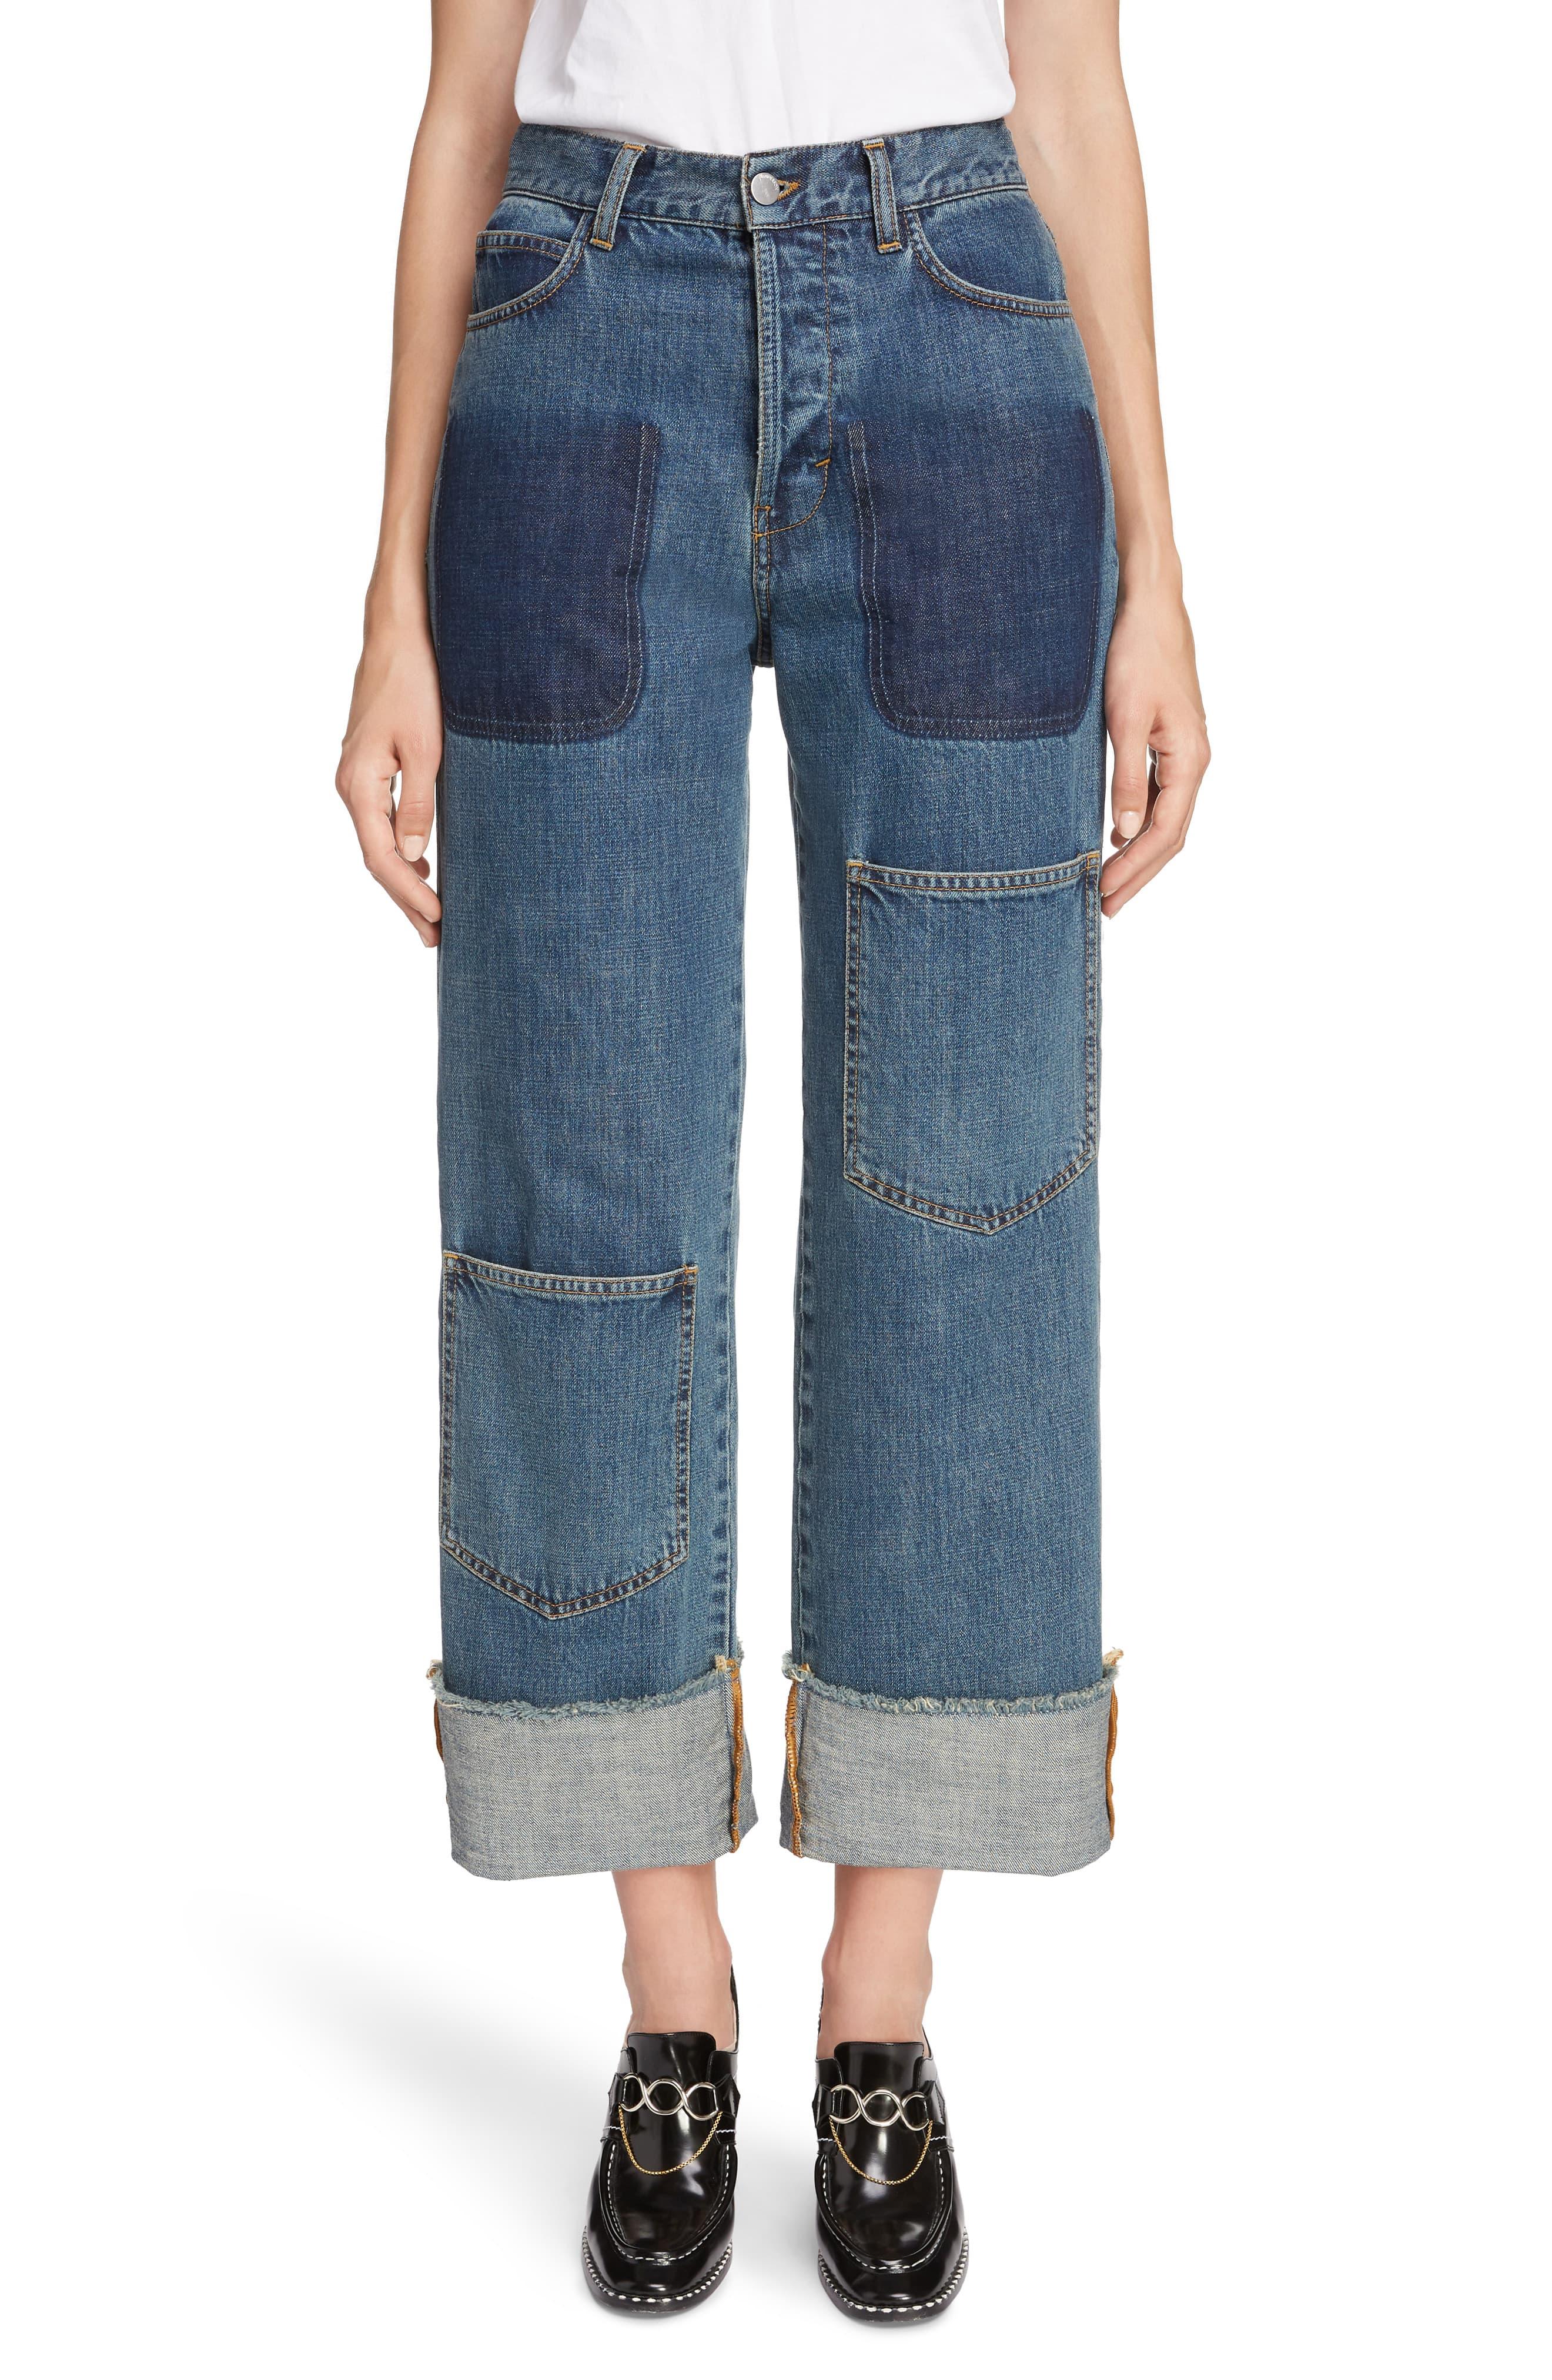 JW Anderson Denim Shaded Pocket Wide Leg Ankle Jeans in Mid Blue (Blue